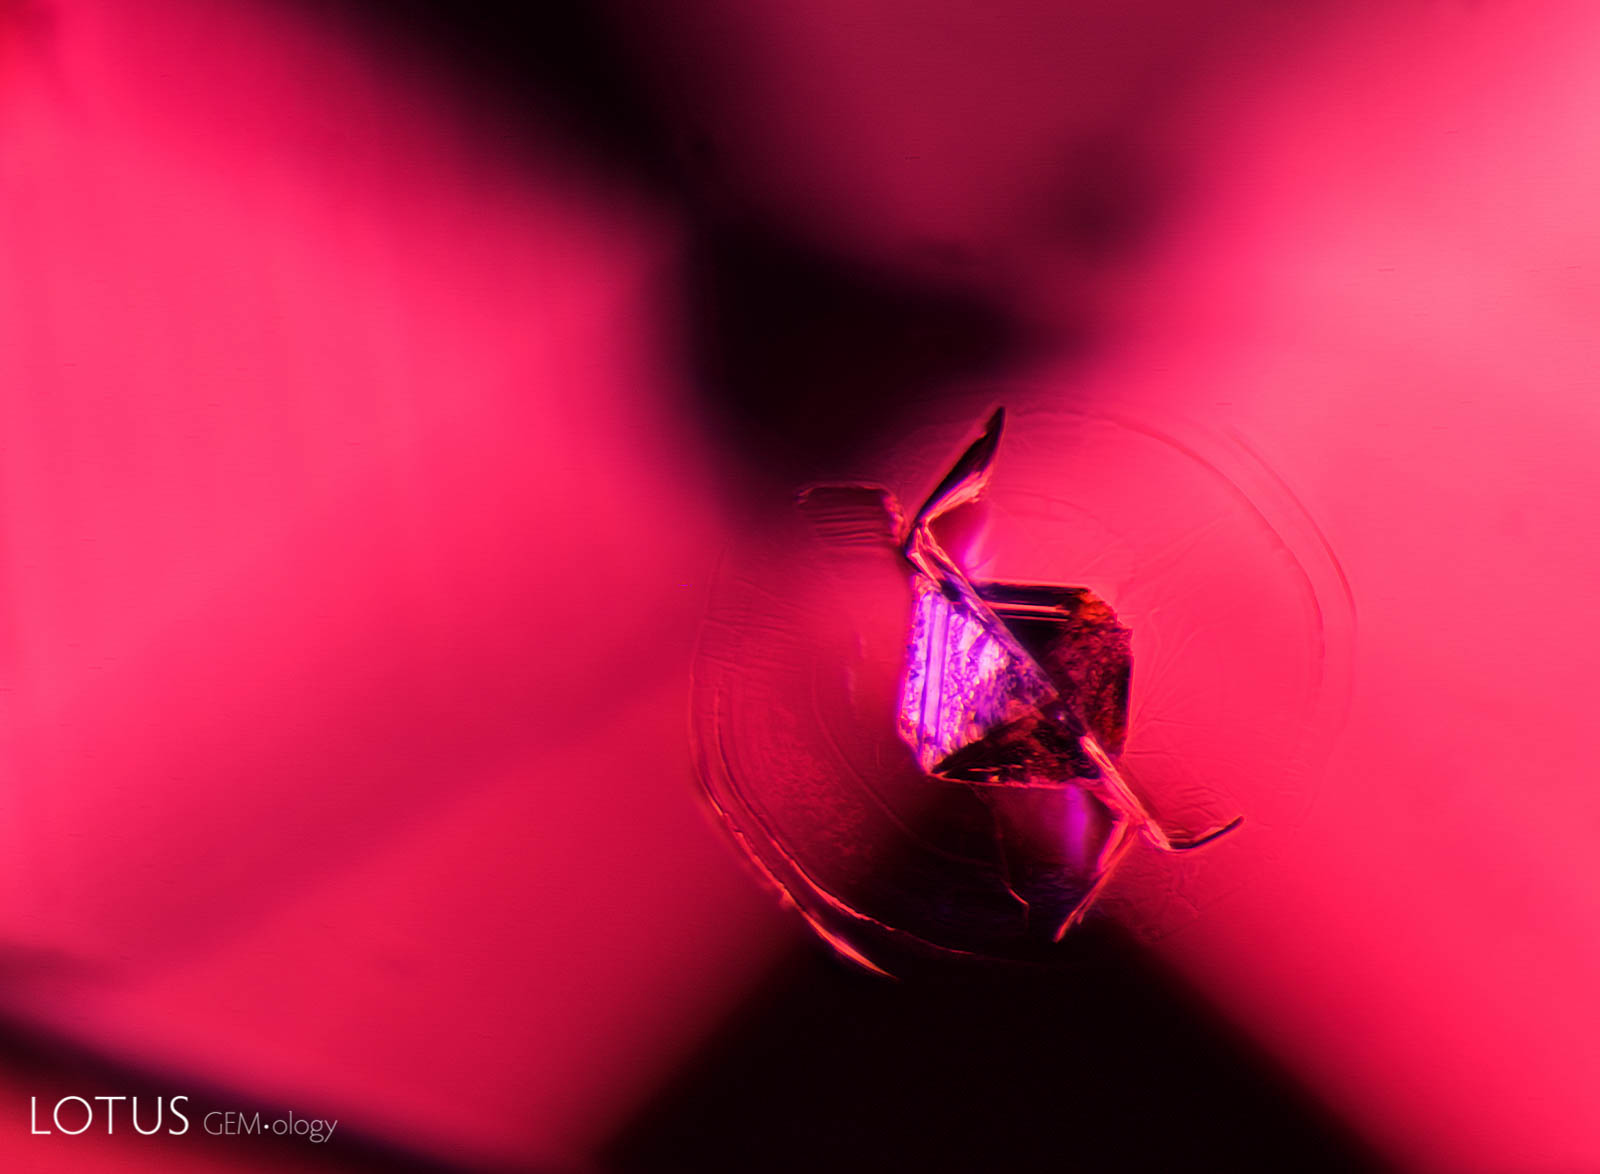 Above is an octahedral crystal, a typical feature to look for when identifying spinel. Darkfield + oblique fiber optic illumination. Photo: E. Billie Hughes